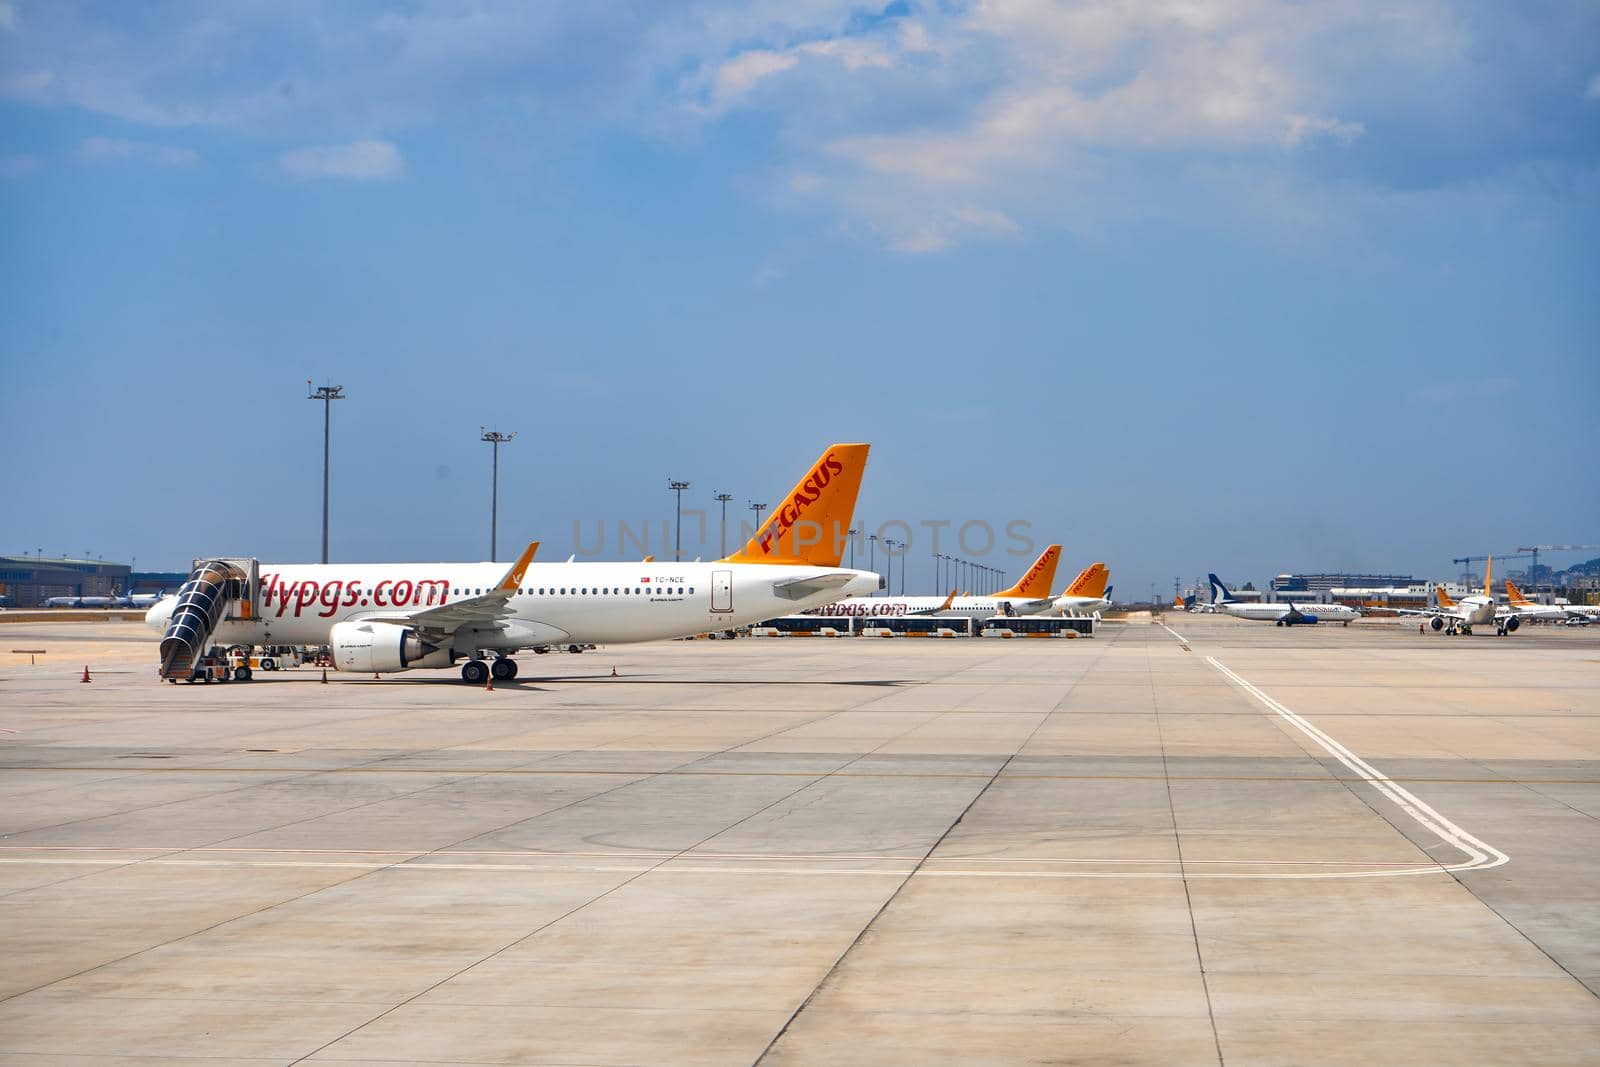 Fly Pegasus aircraft parking at the Turkish airport. Turkey , Istanbul - 21.07.2020